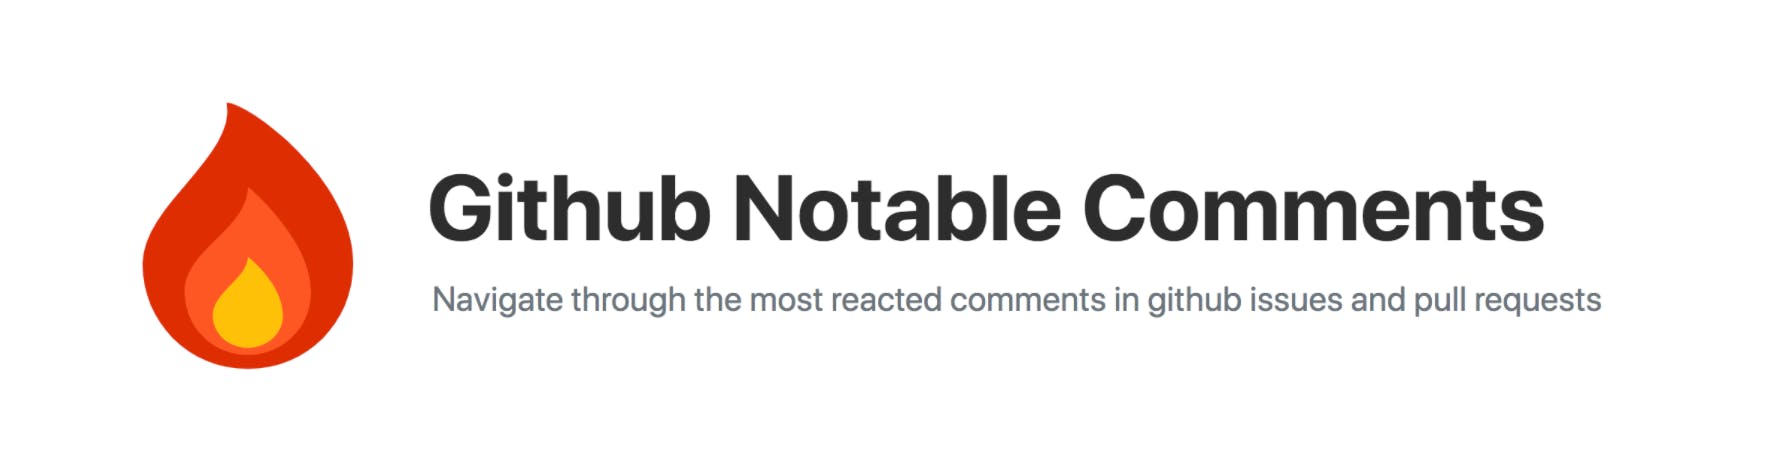 Github Notable Comments media 3